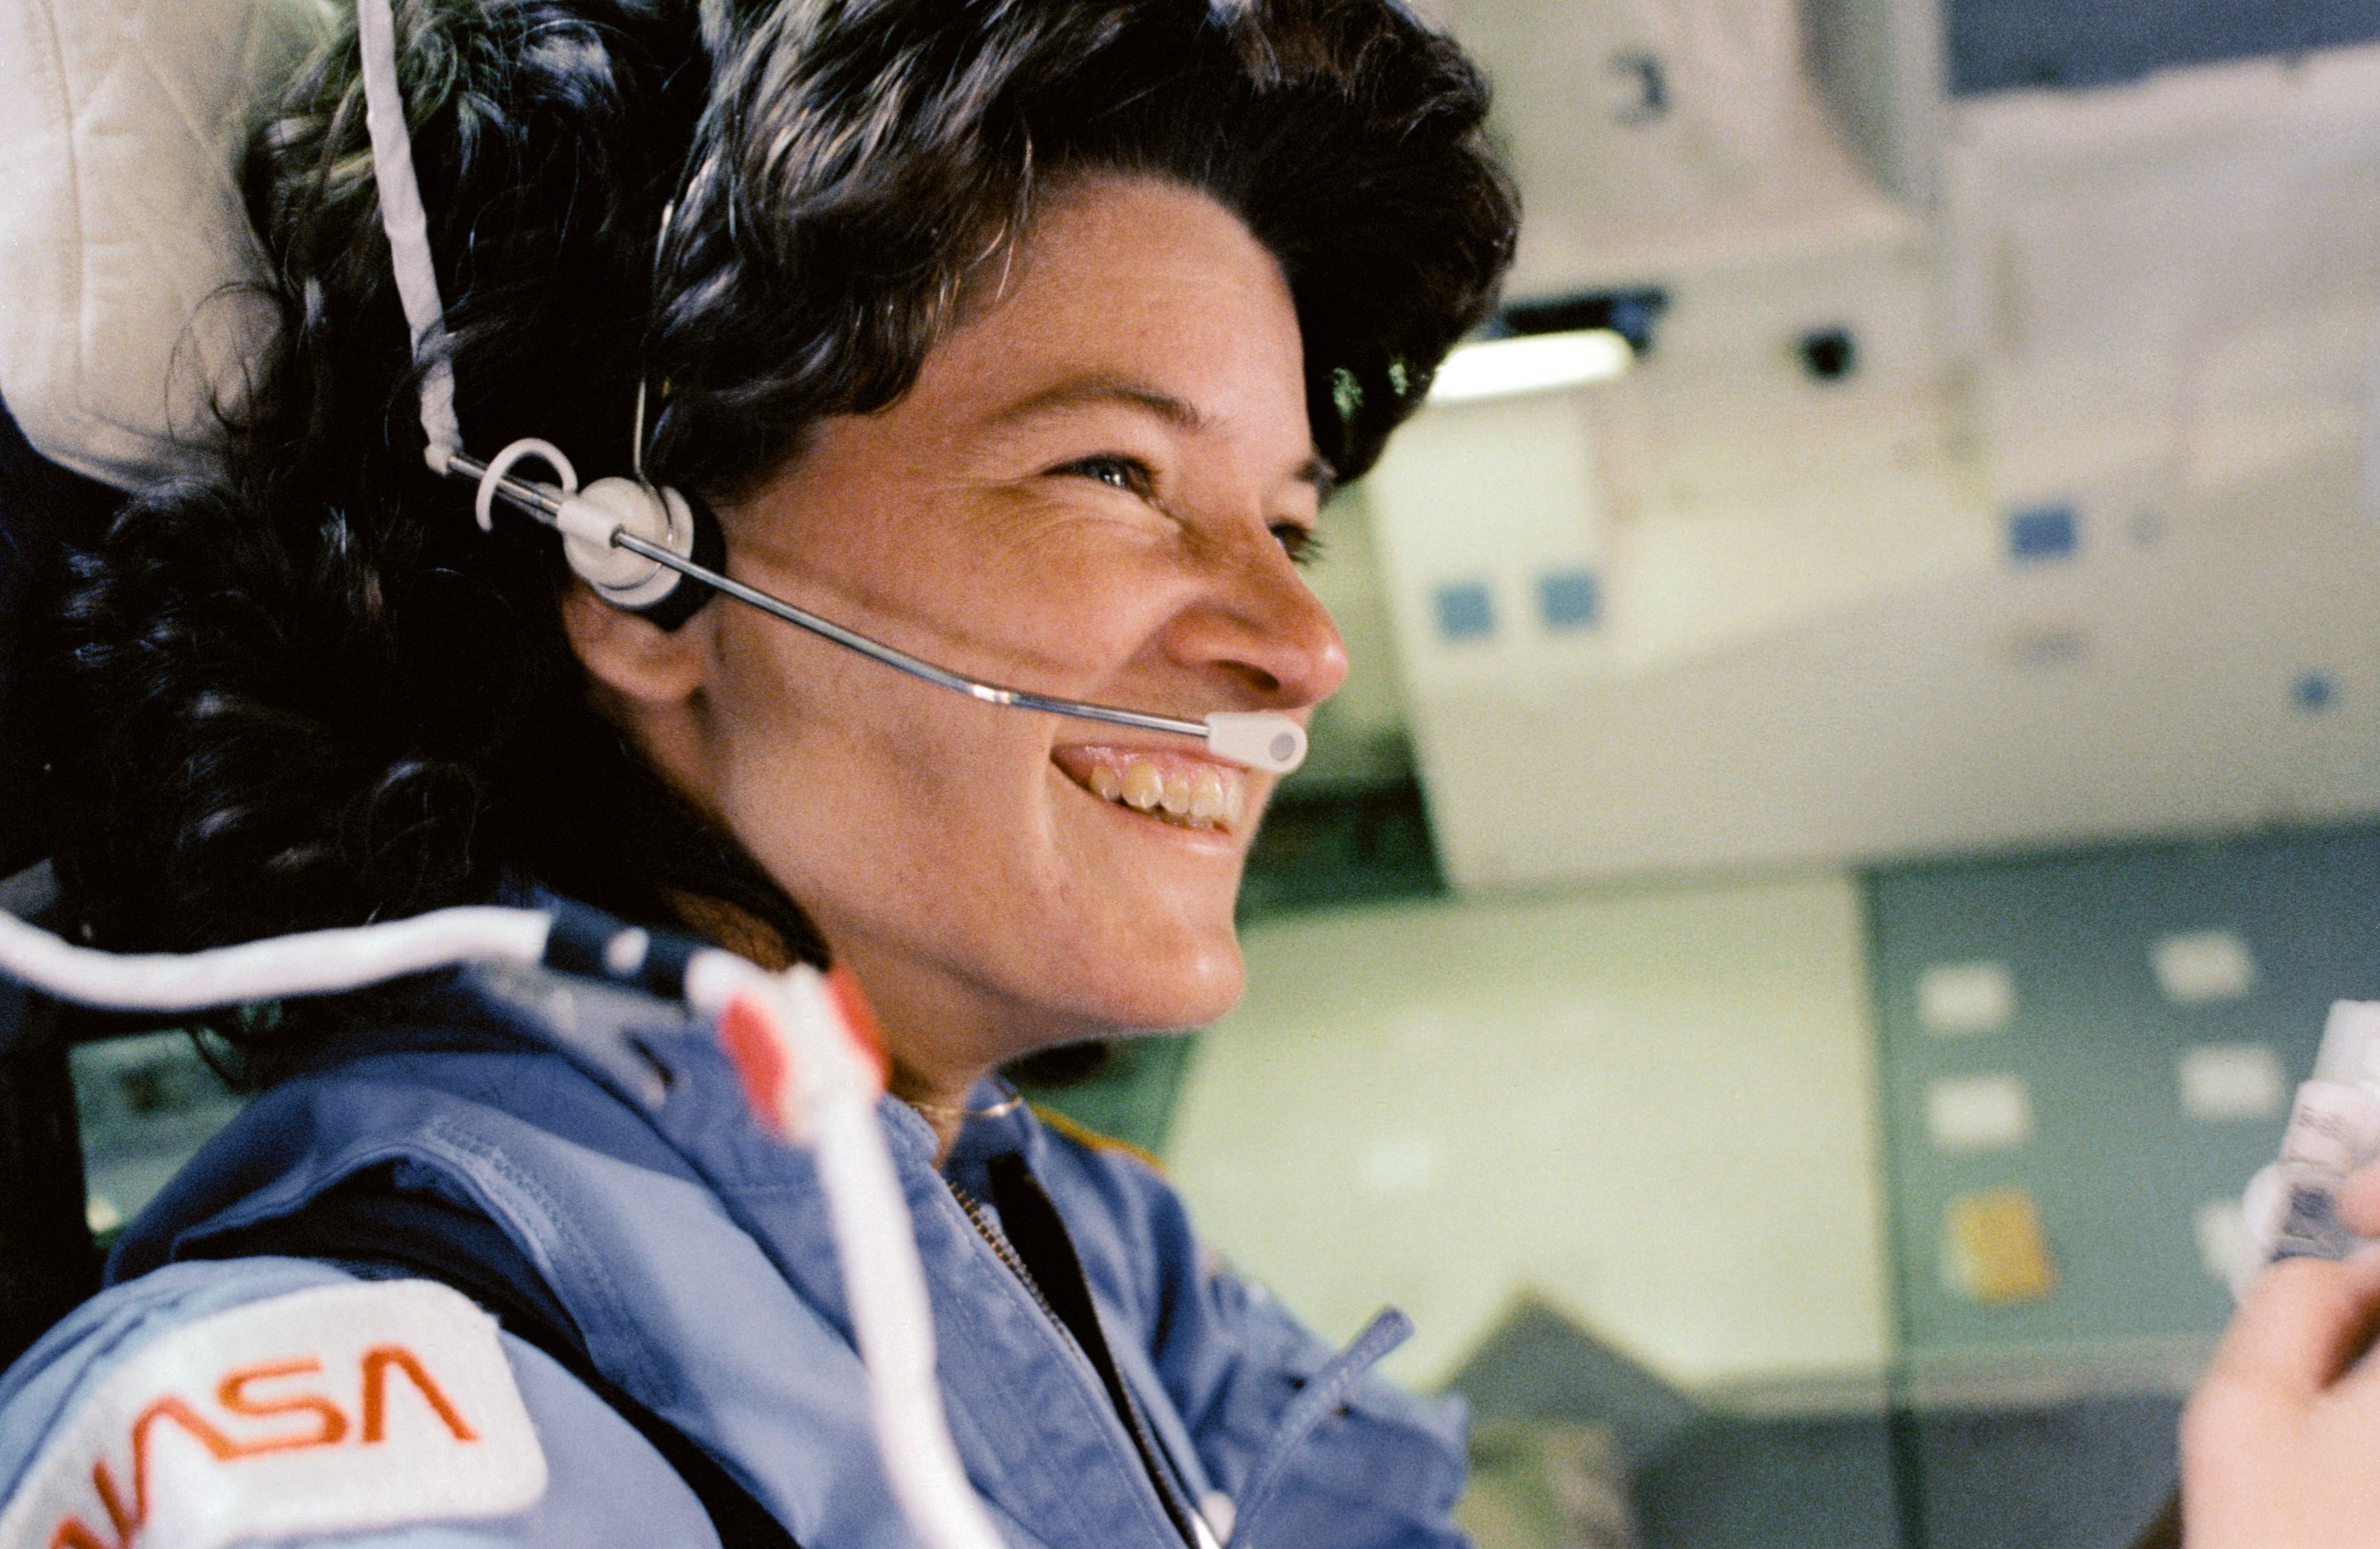 Tributes Mount As Sally Ride's 30th Anniversary In Space Approaches - Universe Today2877 x 1872